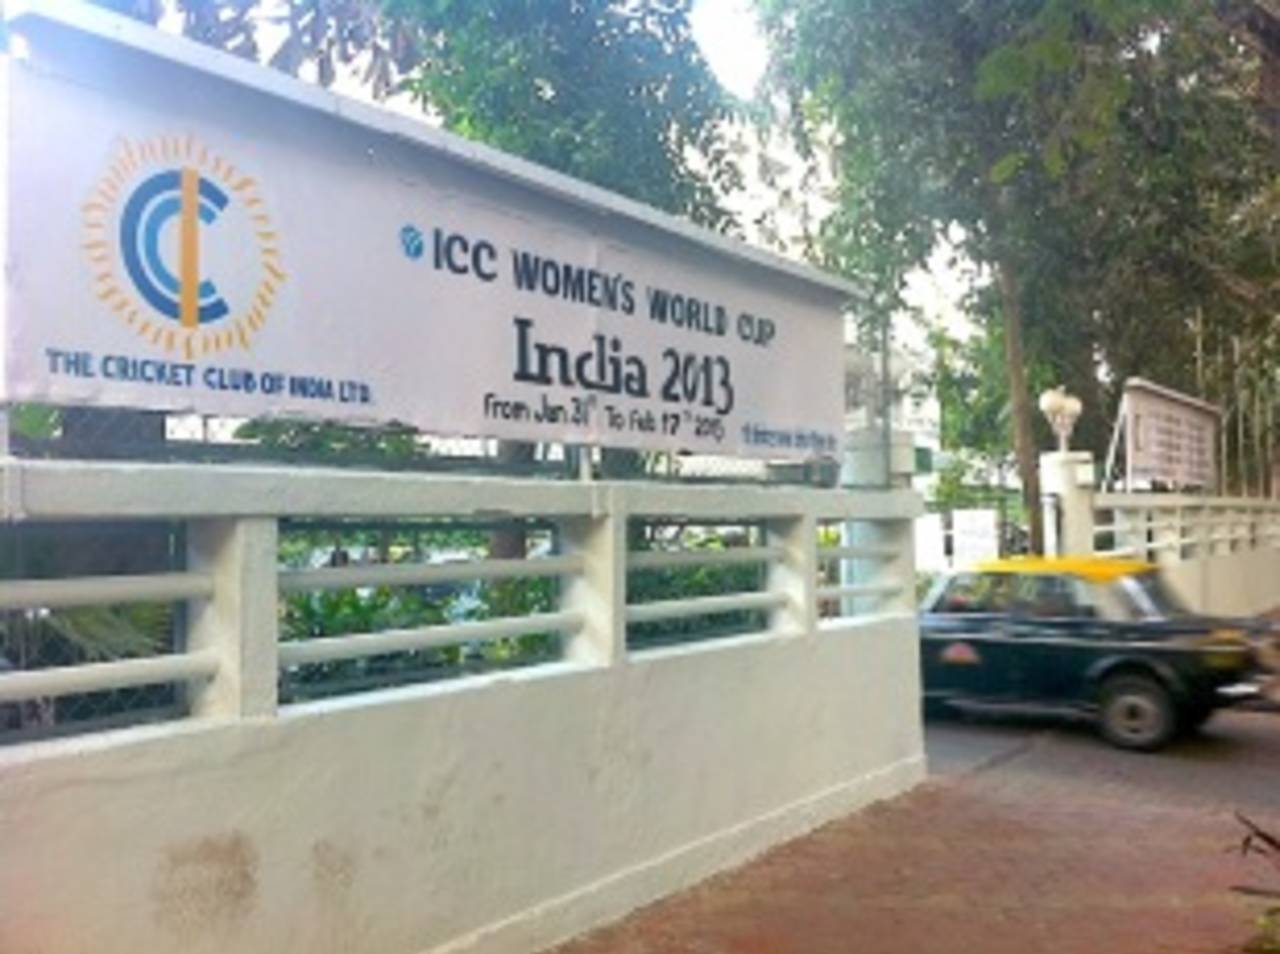 The entrance to the Cricket Club of India ahead of the Women's World Cup, Mumbai, January 30, 2013